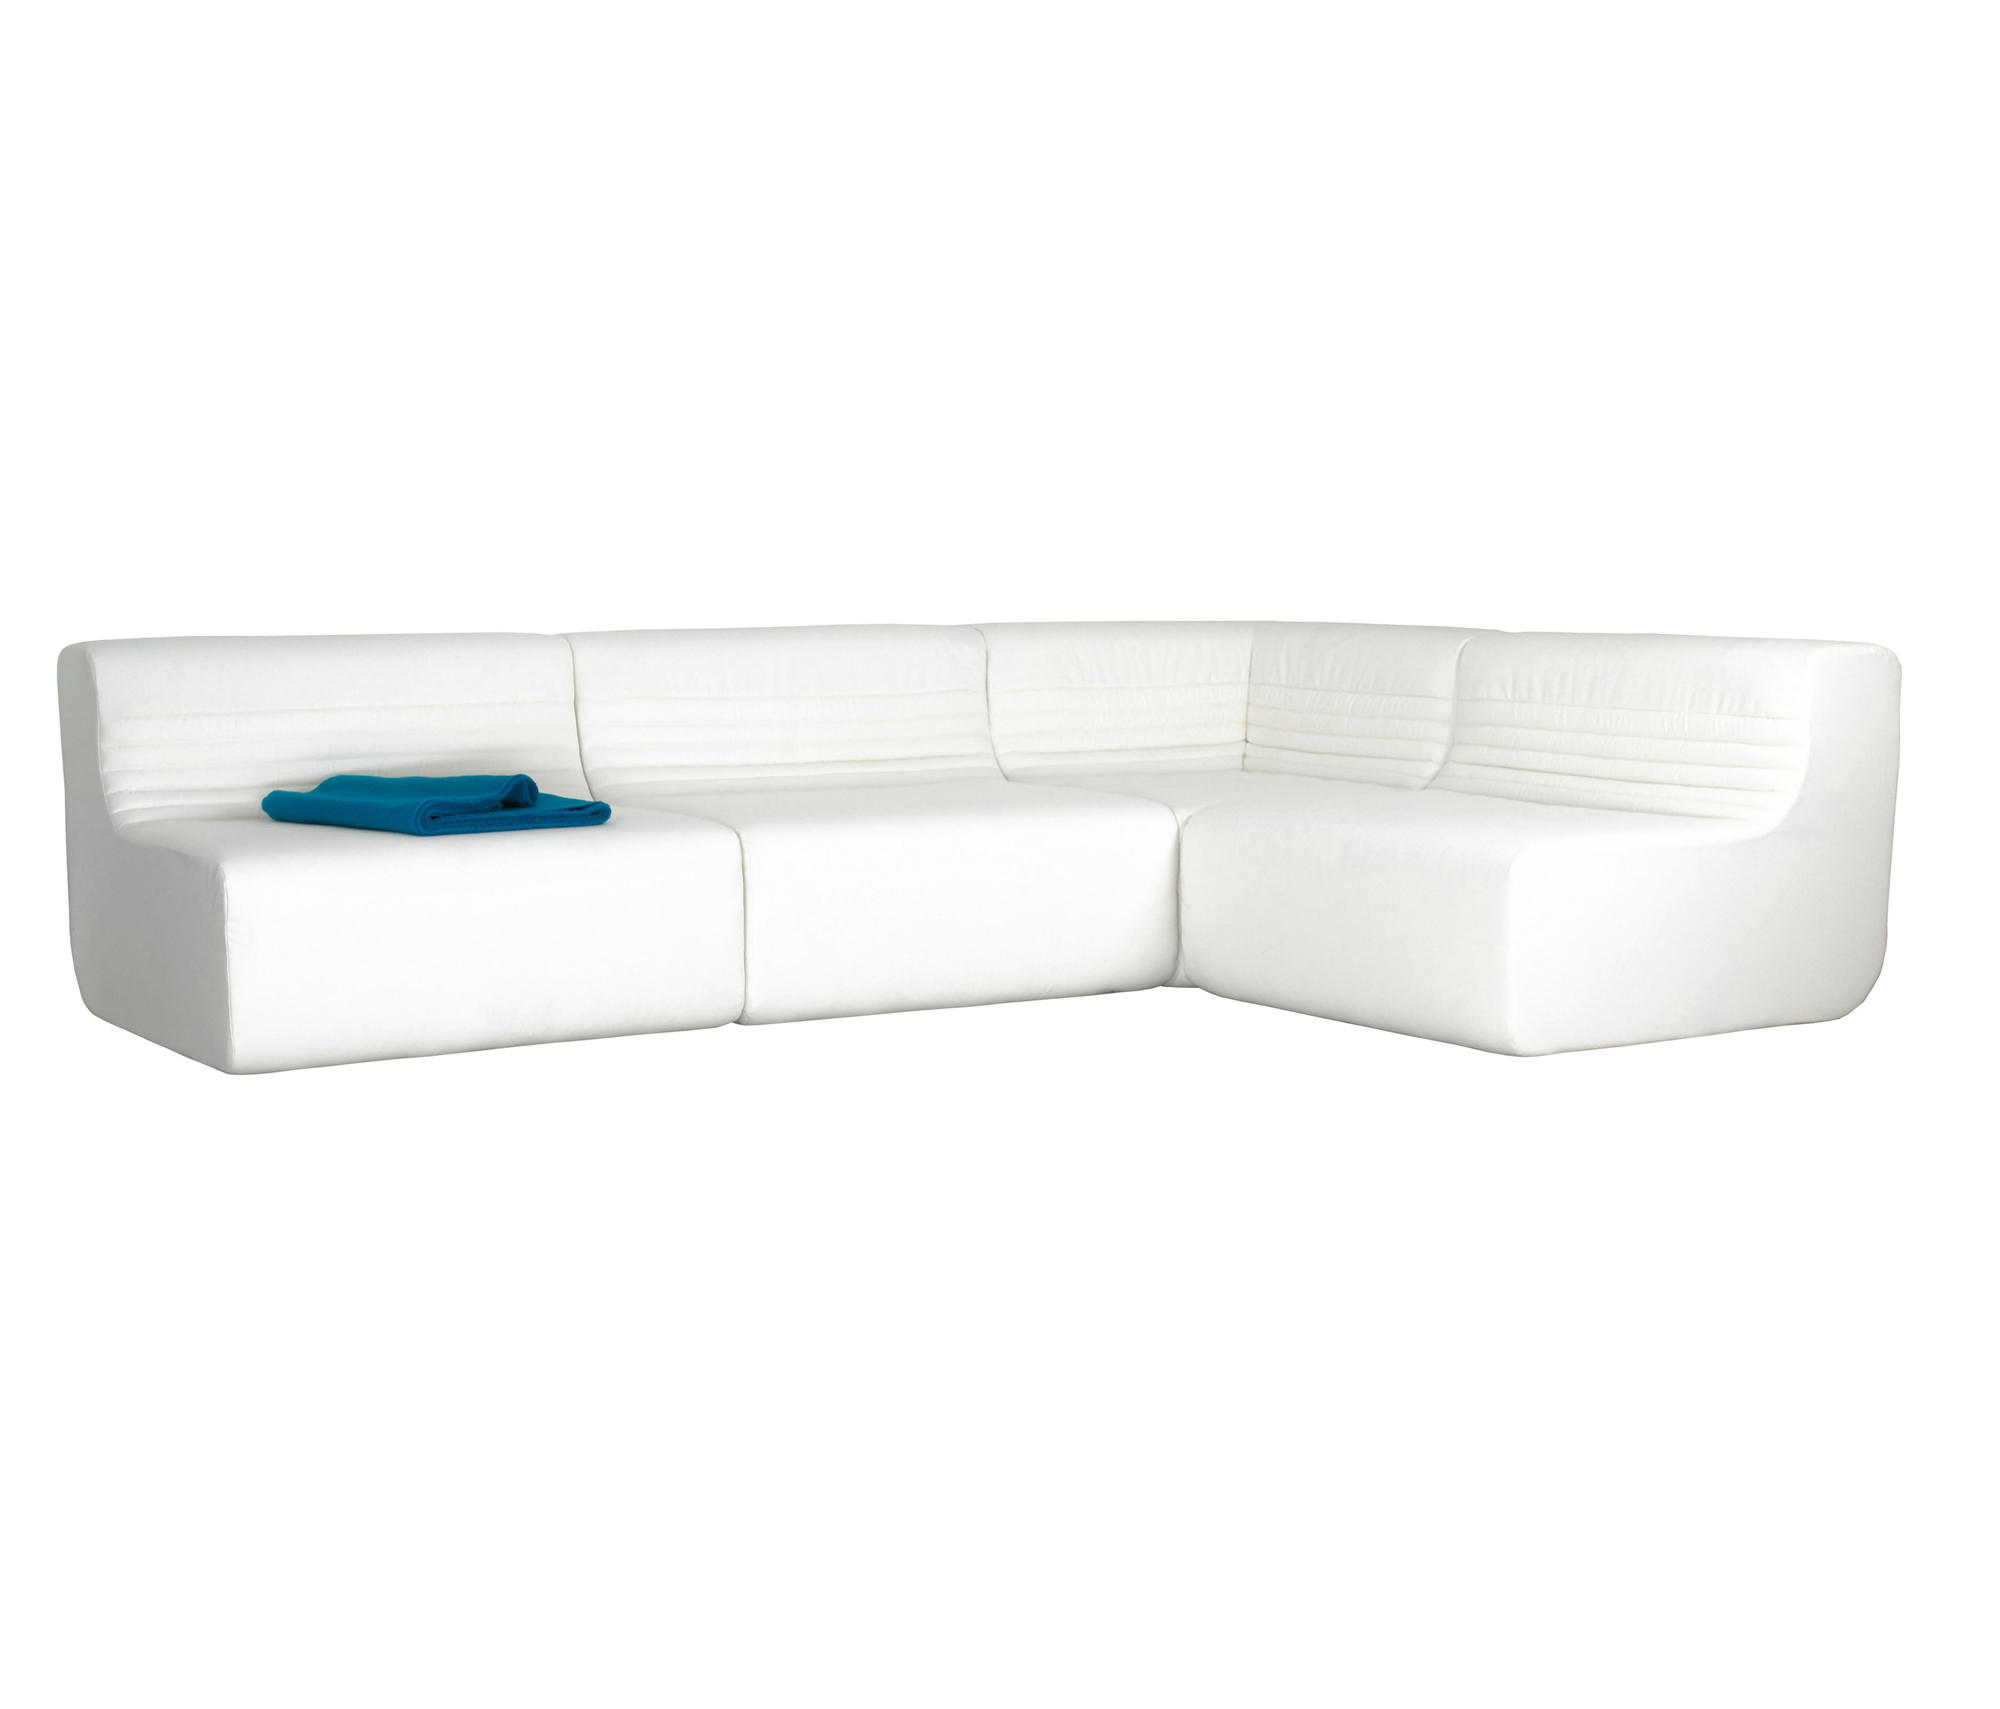 LOFT SOFA - Modular seating systems from Softline A/S | Architonic